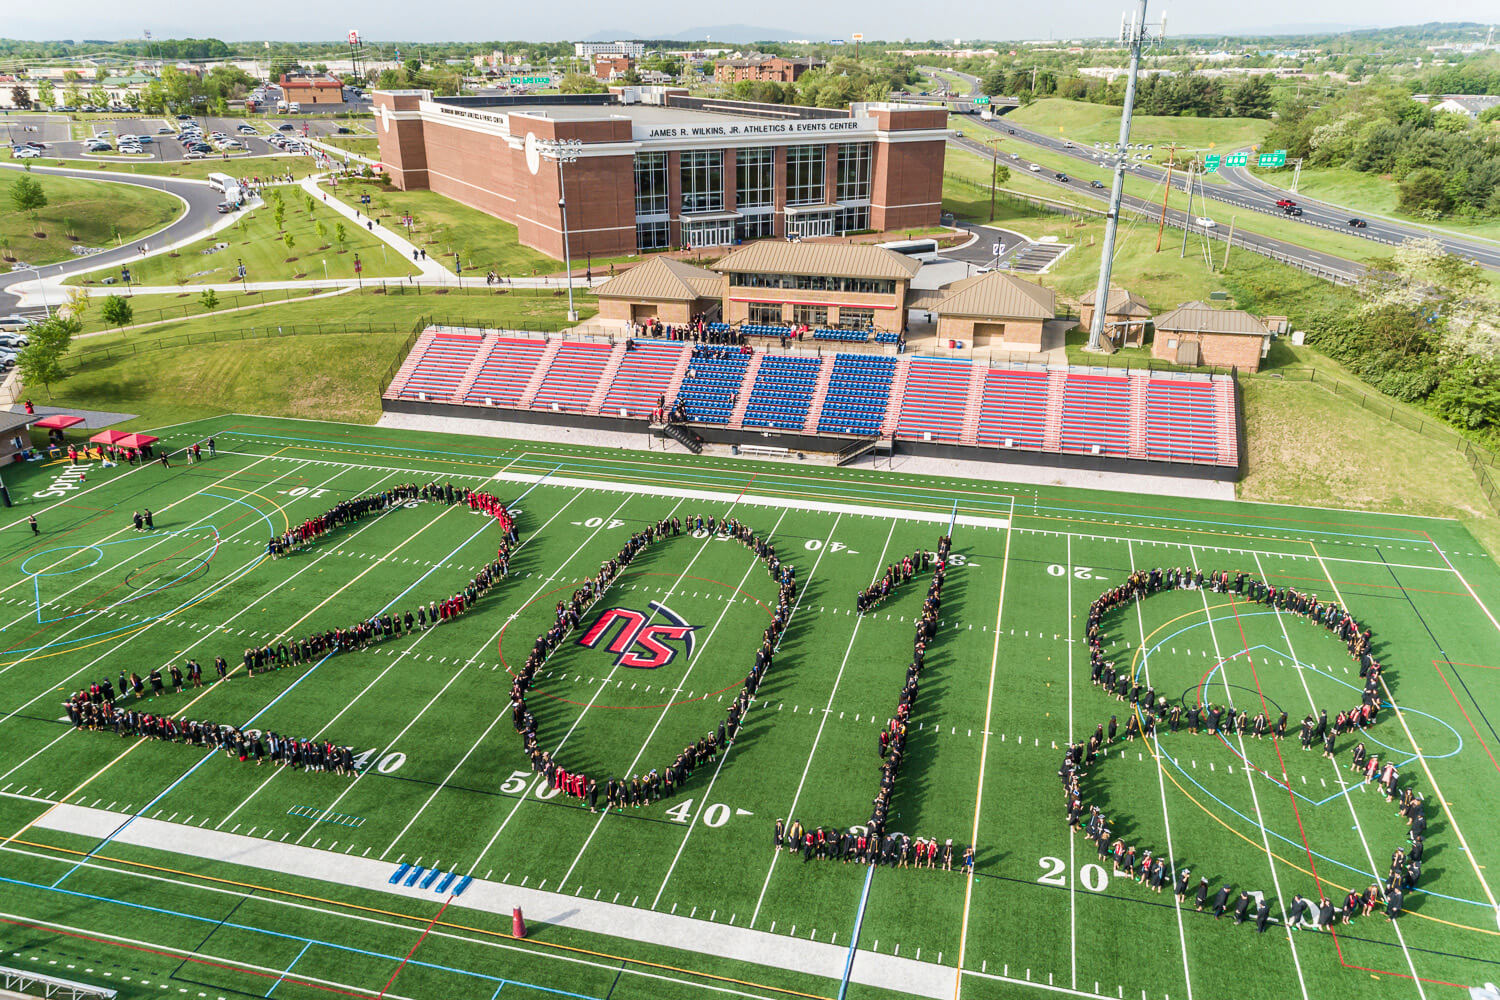 Shenandoah University Celebrates 1,302 Graduates at May 12 Commencement First Commencement Ceremony Held in New James R. Wilkins, Jr. Athletics & Events Center